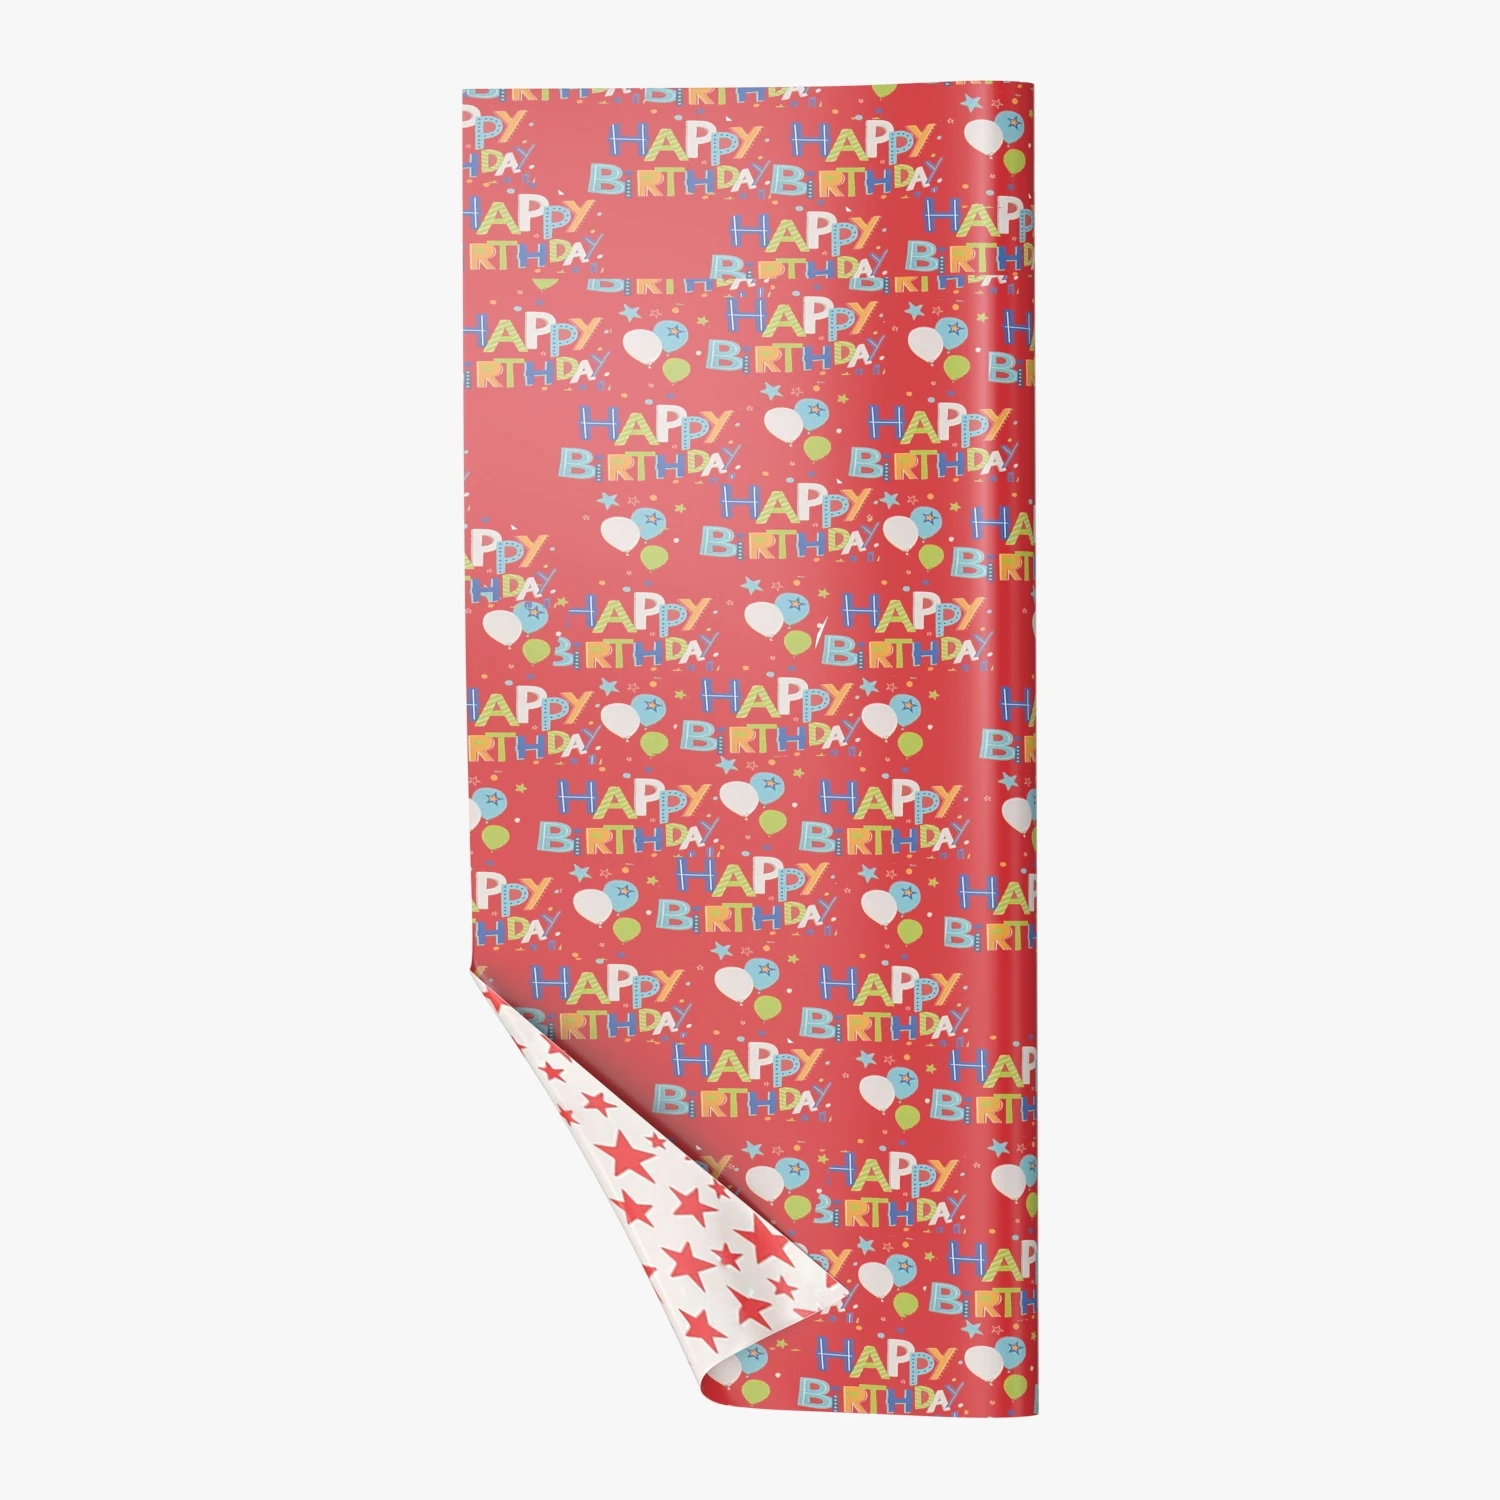 Greetings Reversible Wrapping Paper 3D Model_04